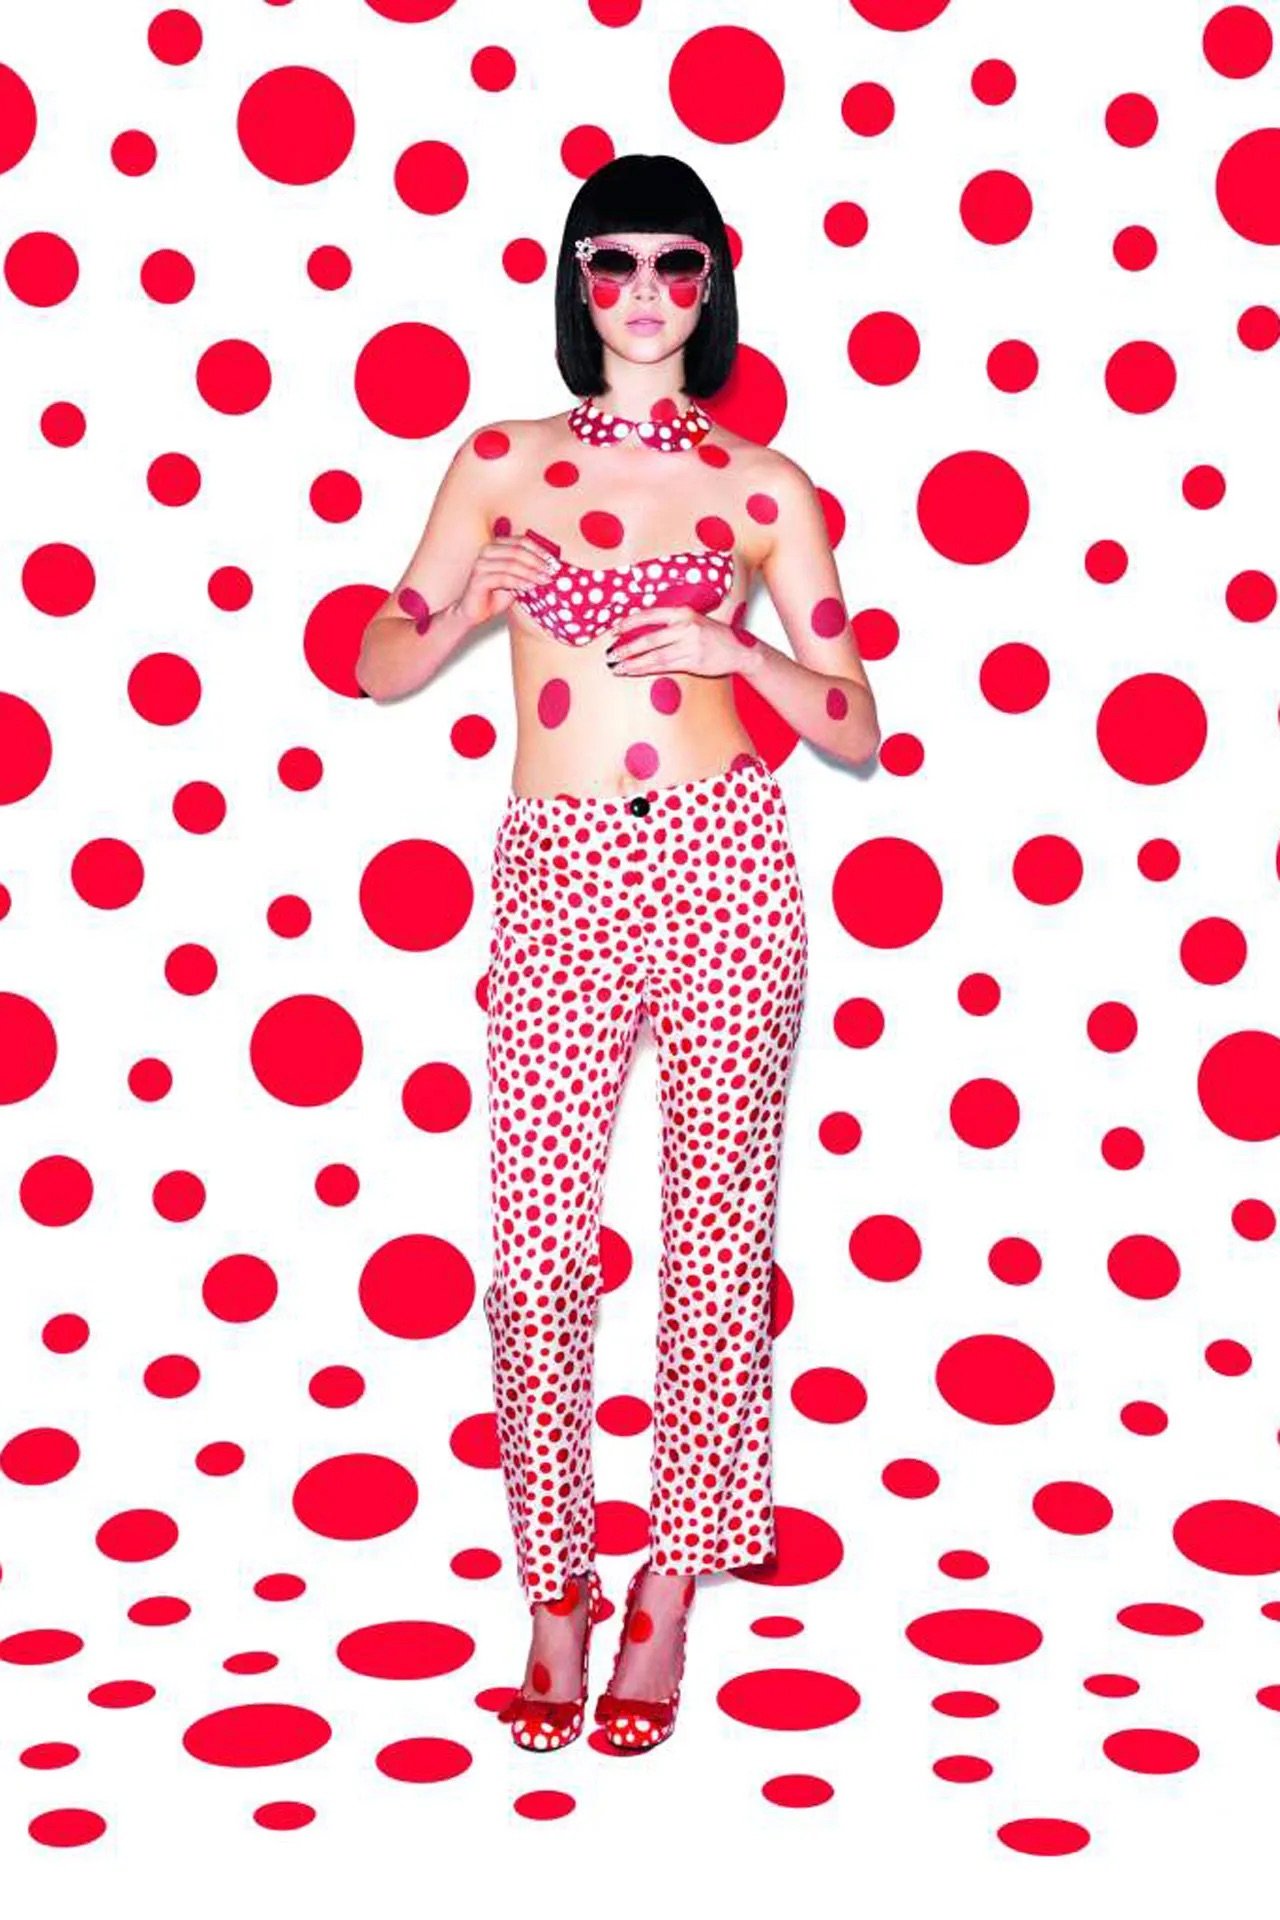 Louis Vuitton: Louis Vuitton Teases New Collaboration With World Acclaimed  Japanese Artist Yayoi Kusama - Luxferity